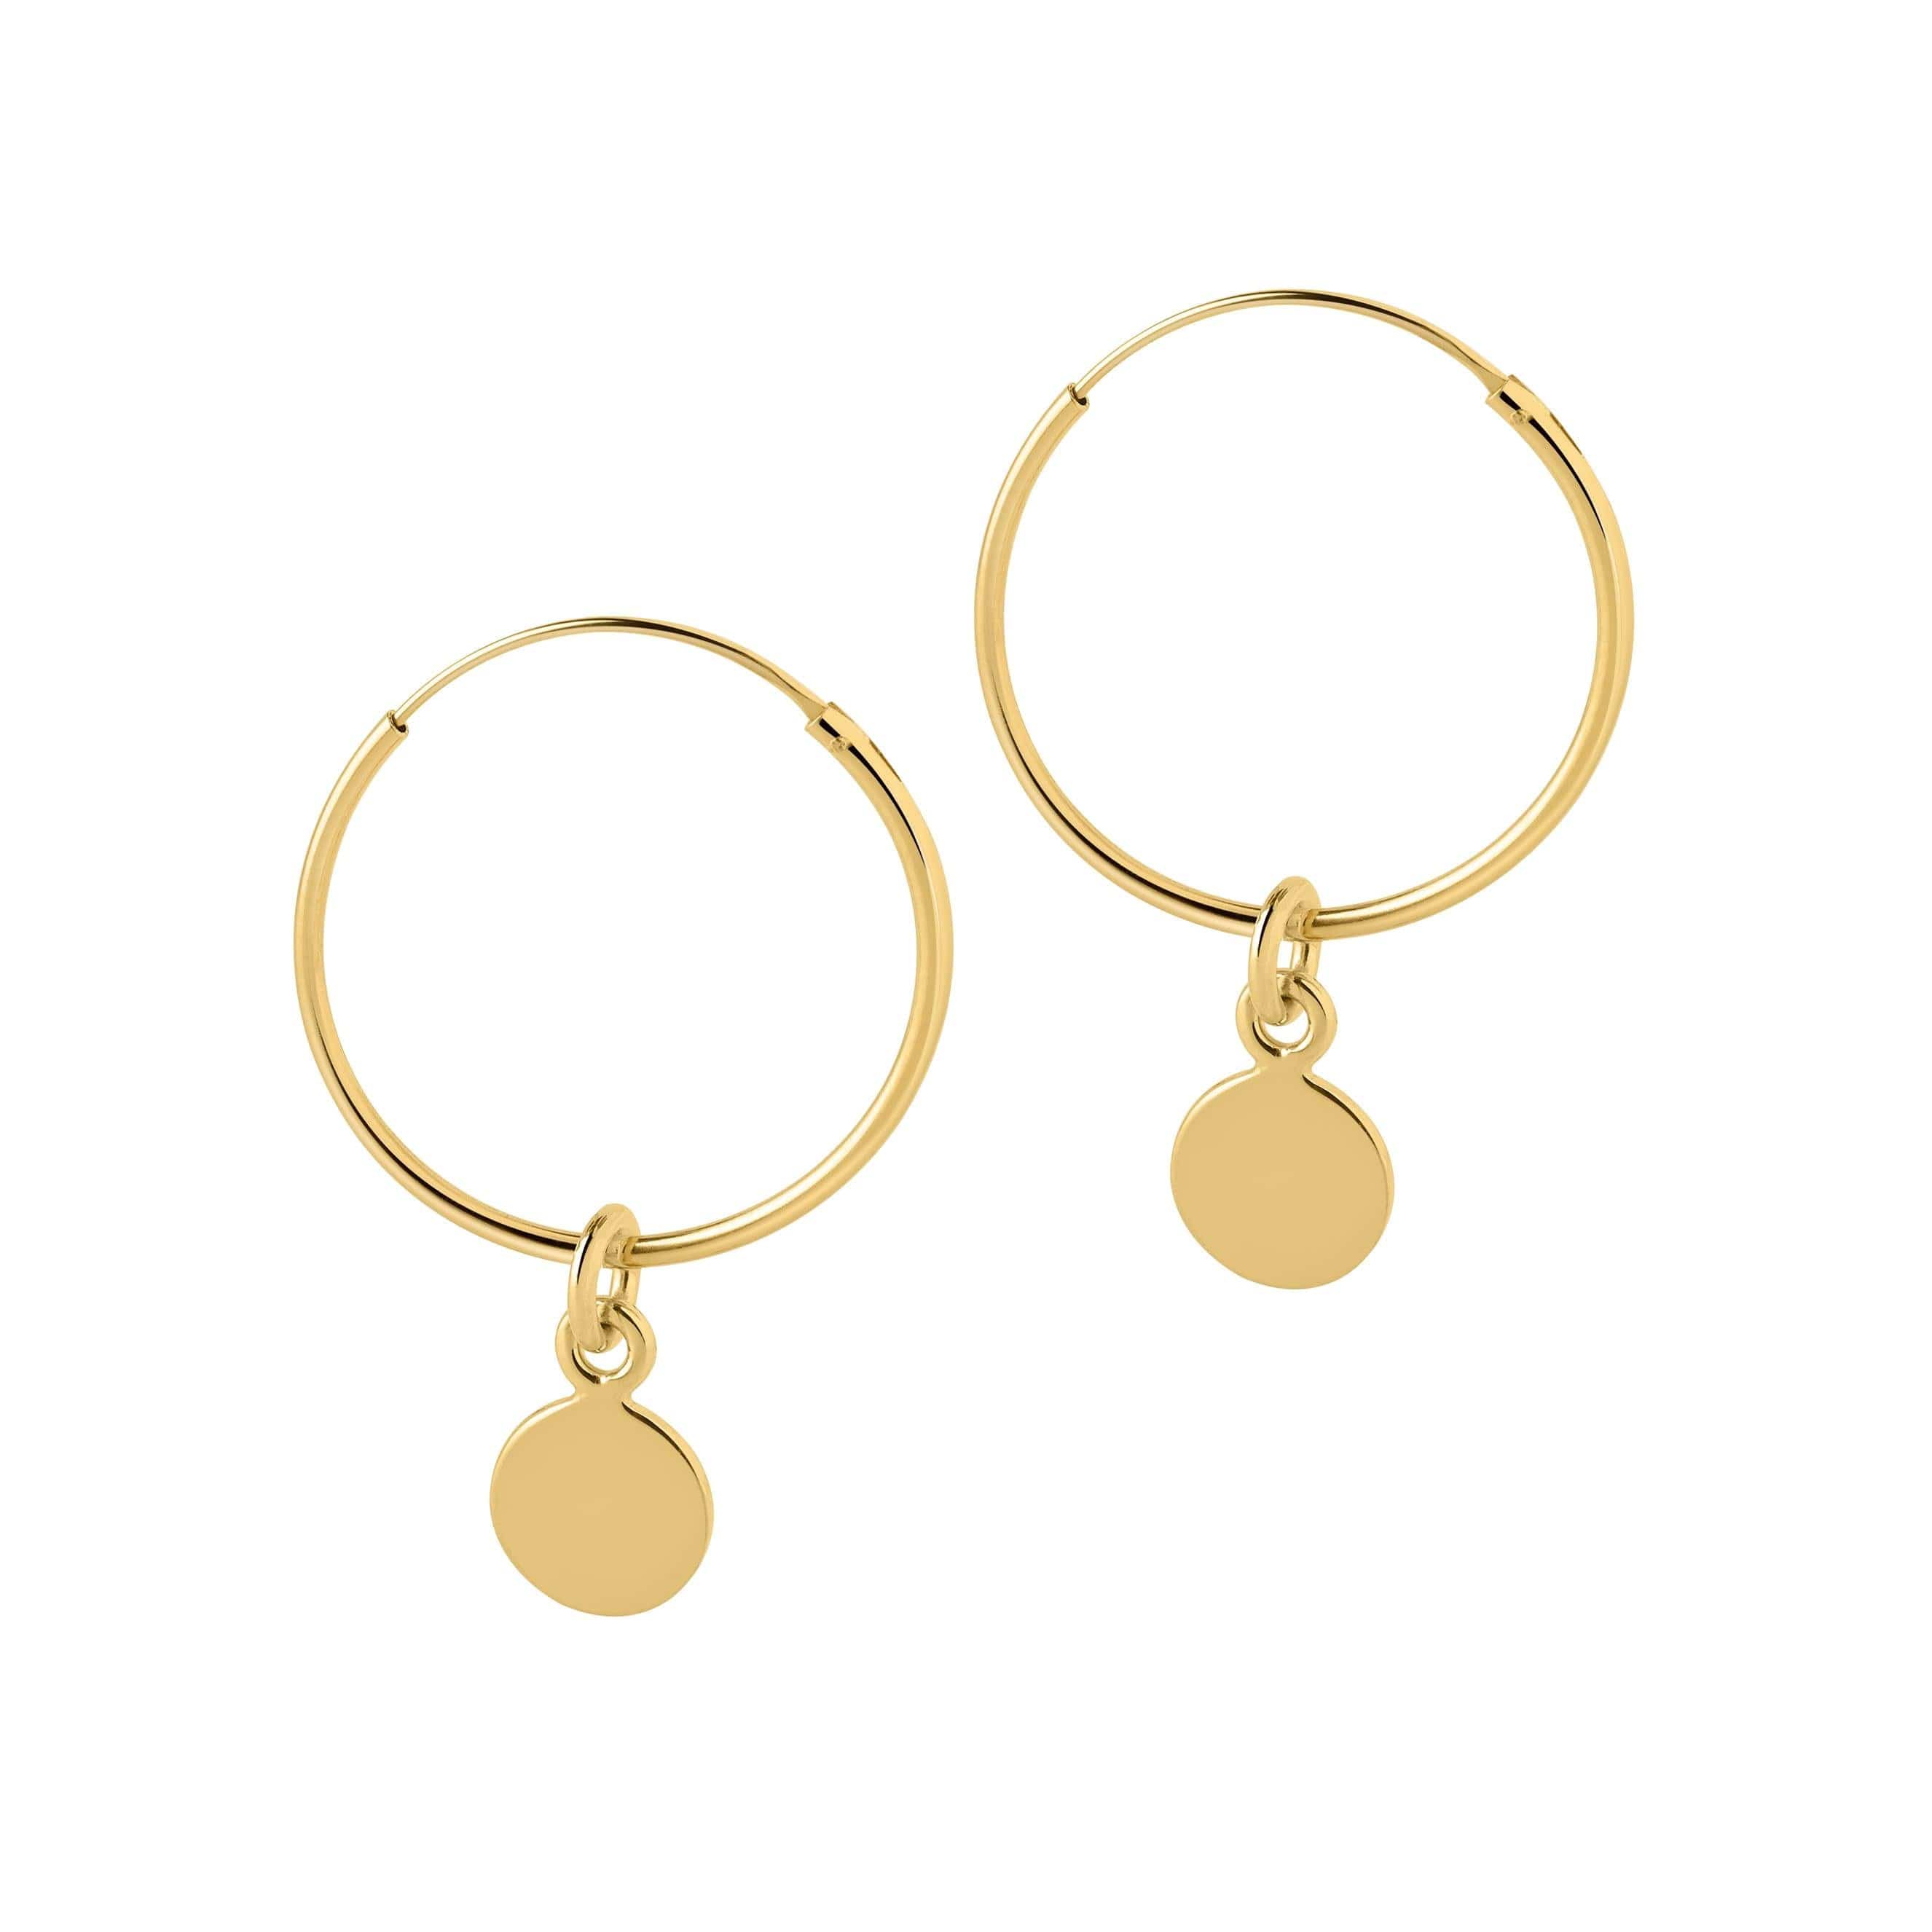 22 mm gold plated hoop earrings with round pendant